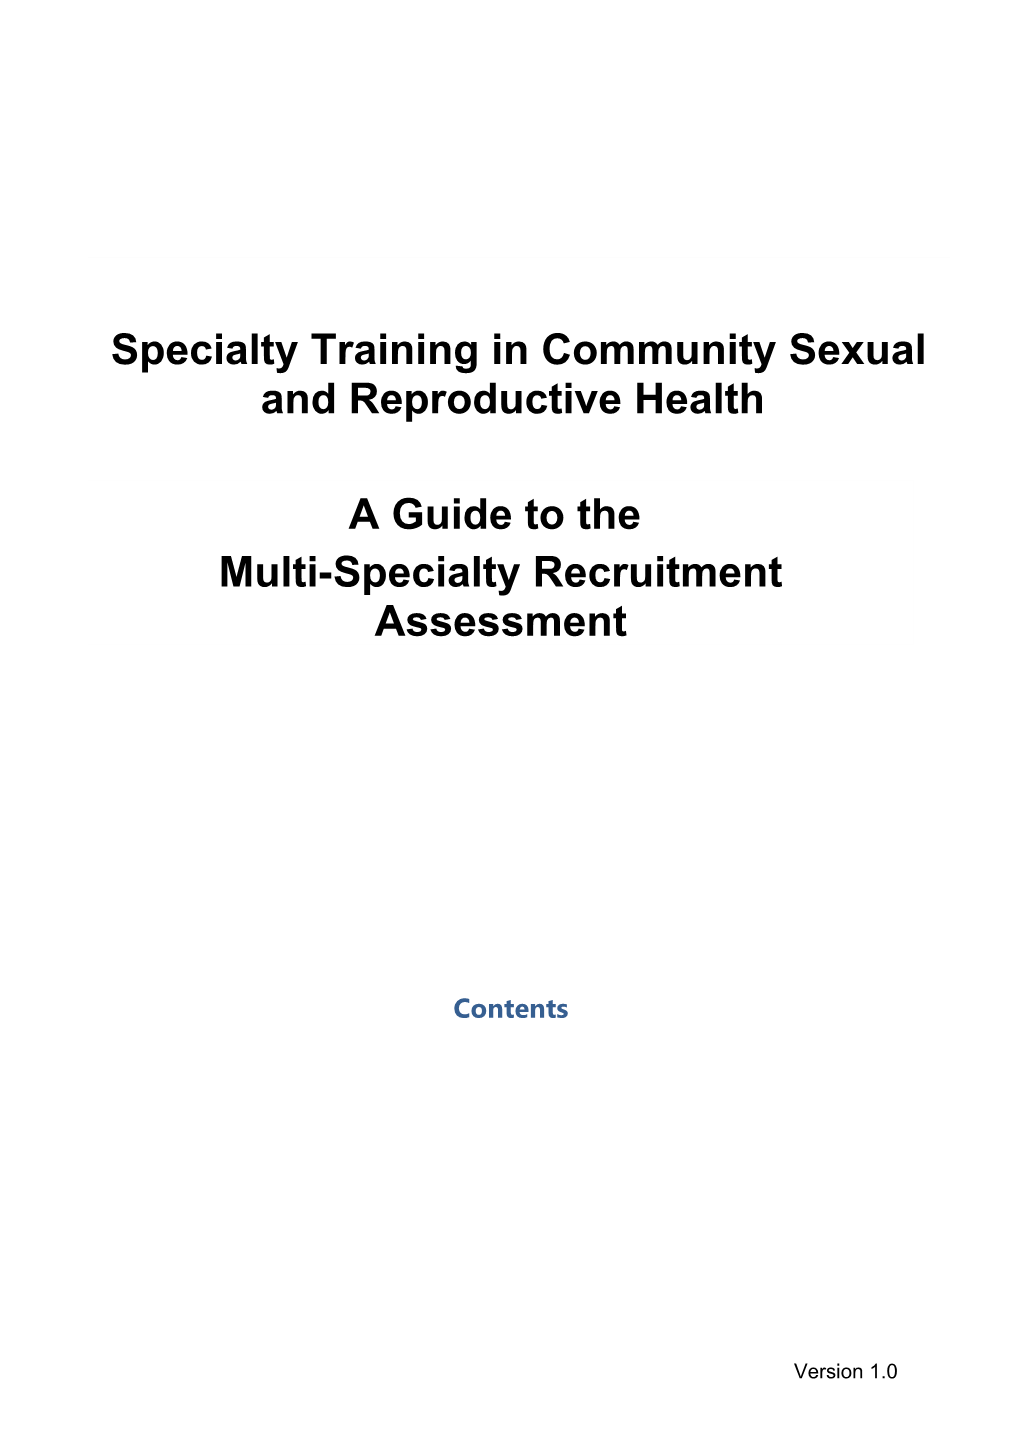 Specialty Training in Community Sexual and Reproductive Health